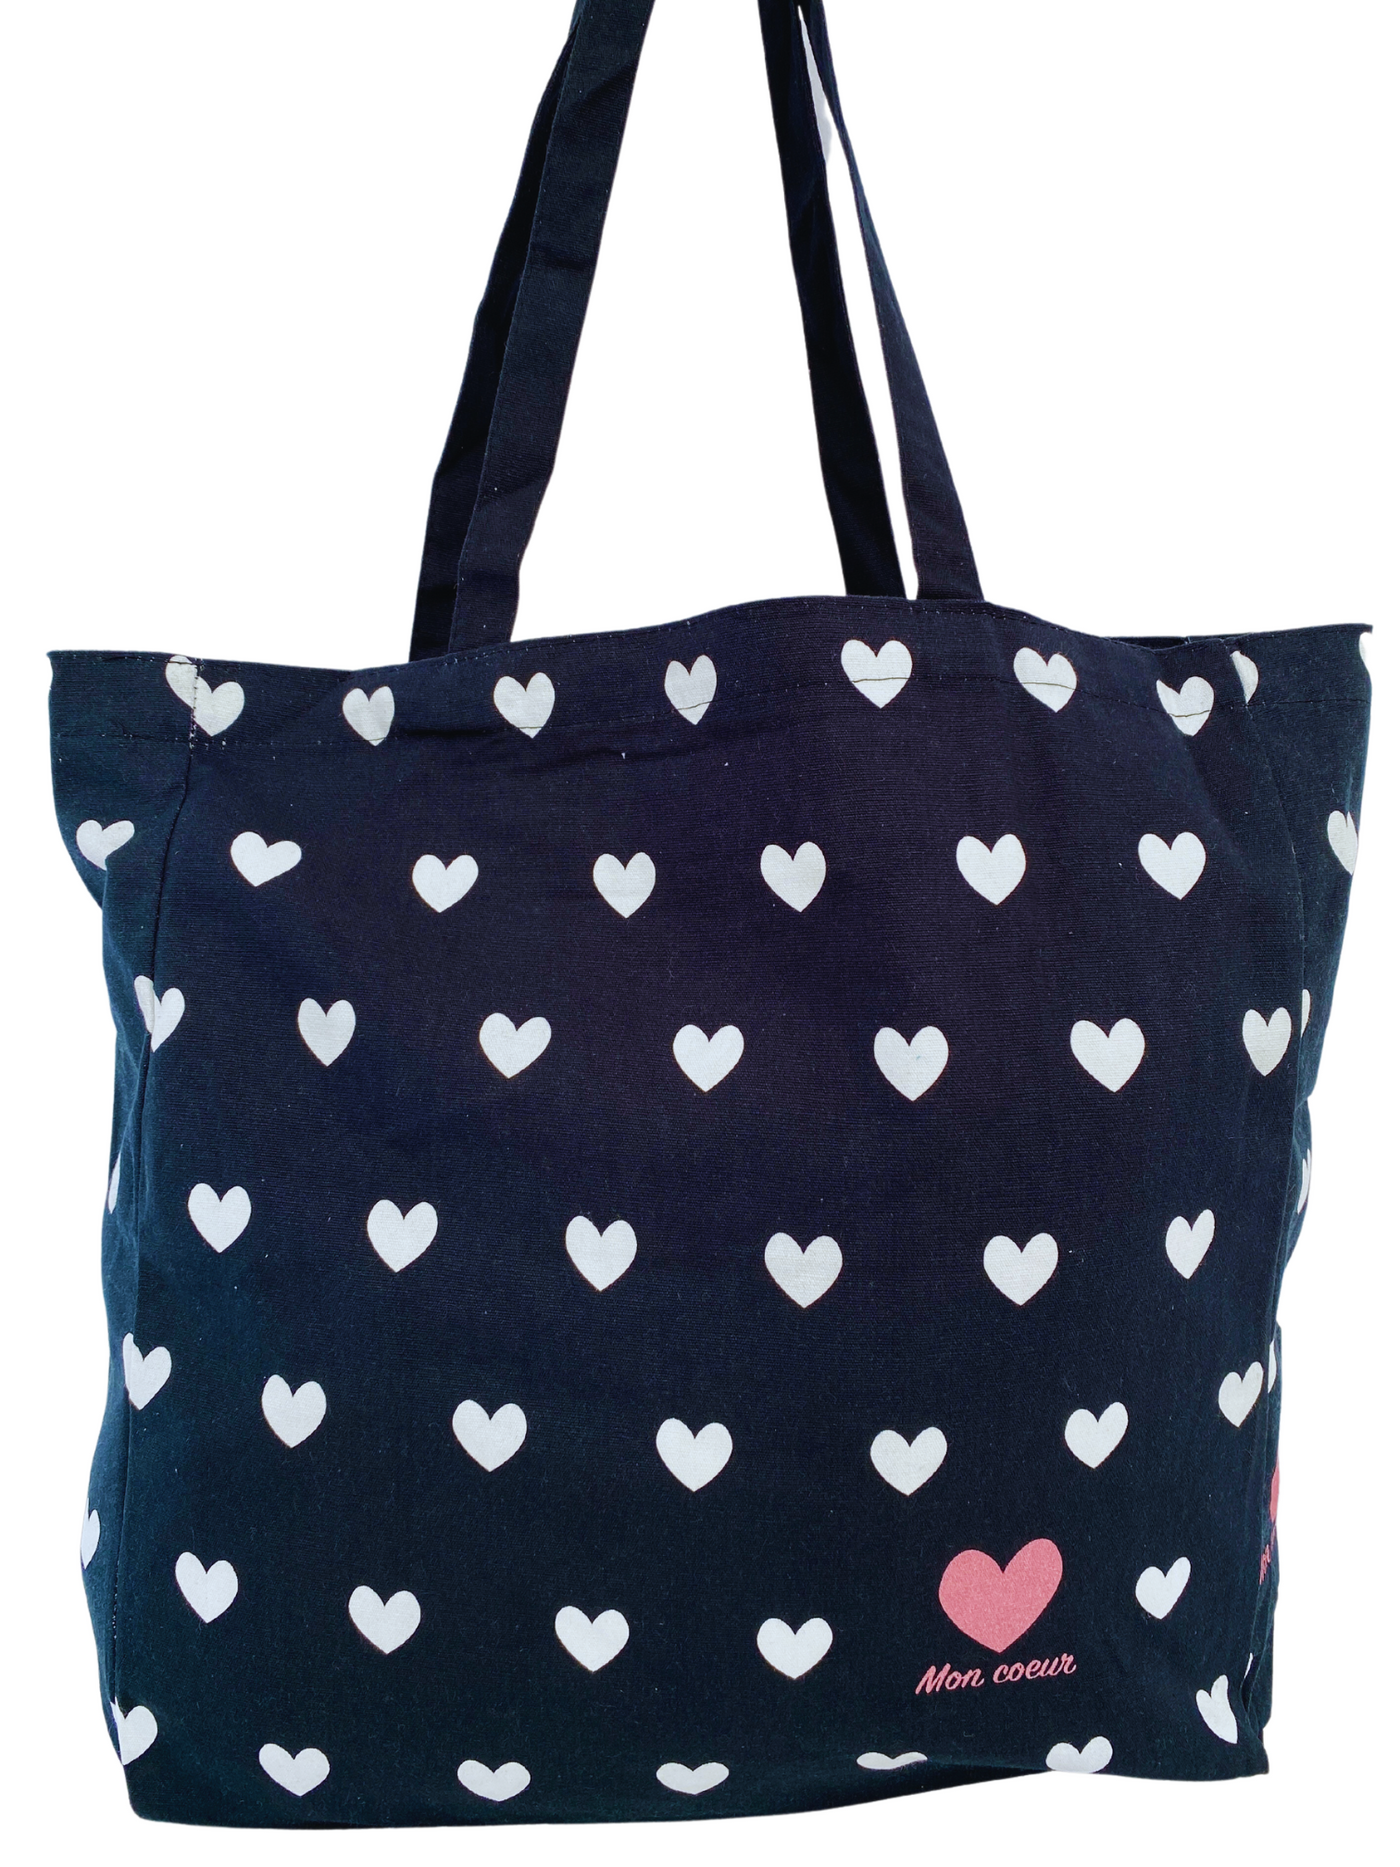 Illustrated Tote Bag: My White Heart